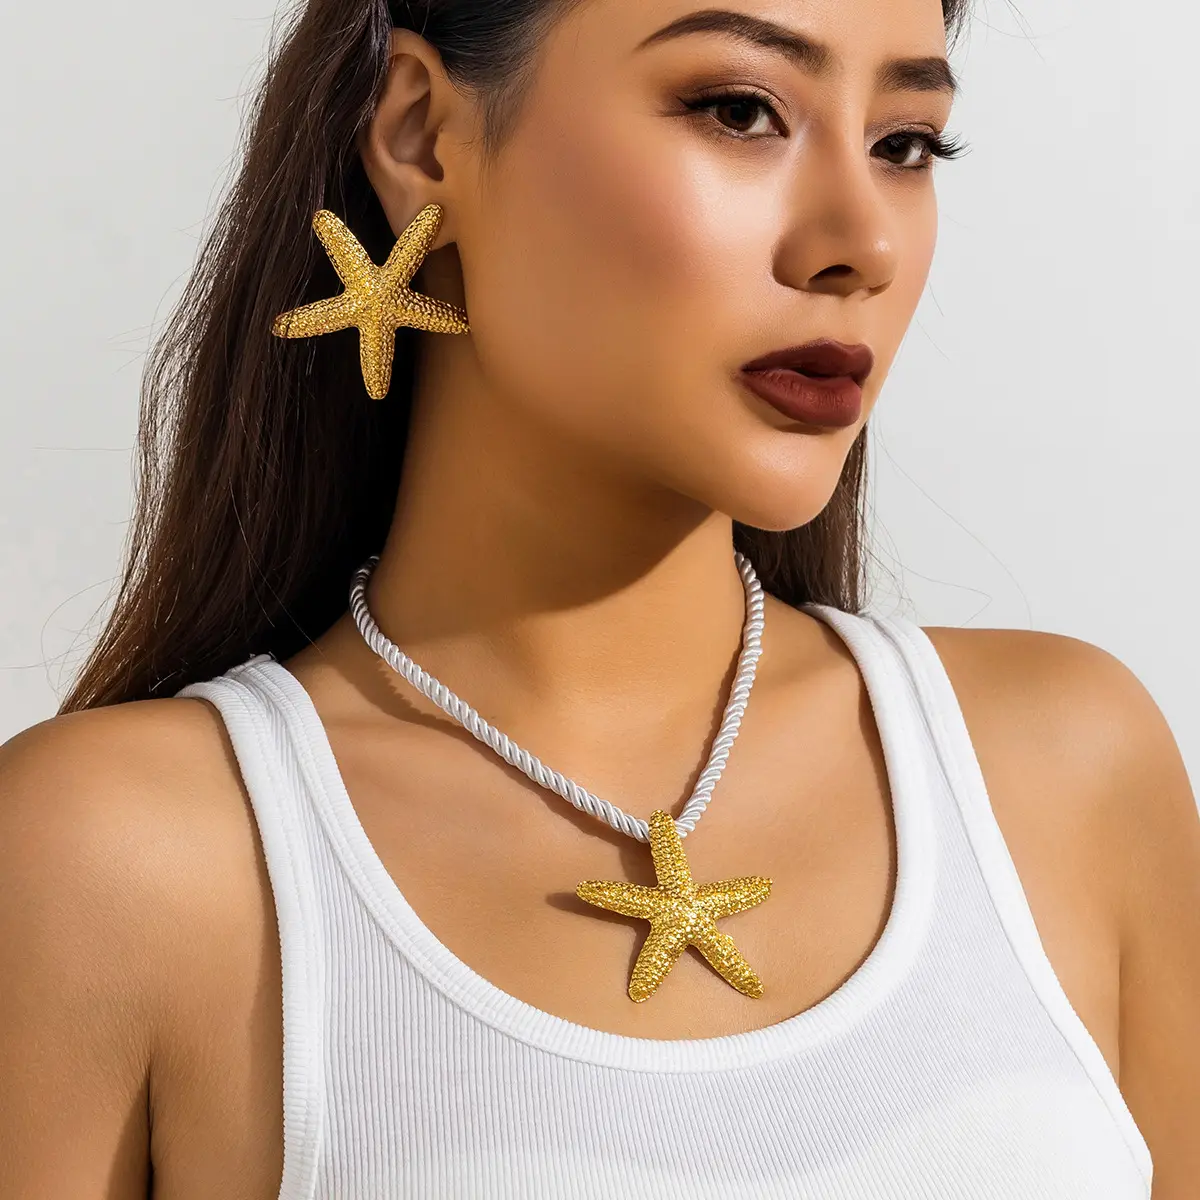 New Fashion Vintage Exaggerate Starfish Pendant Necklace Earrings for Women Summer Holiday Party Beach Jewelry (KN5363)